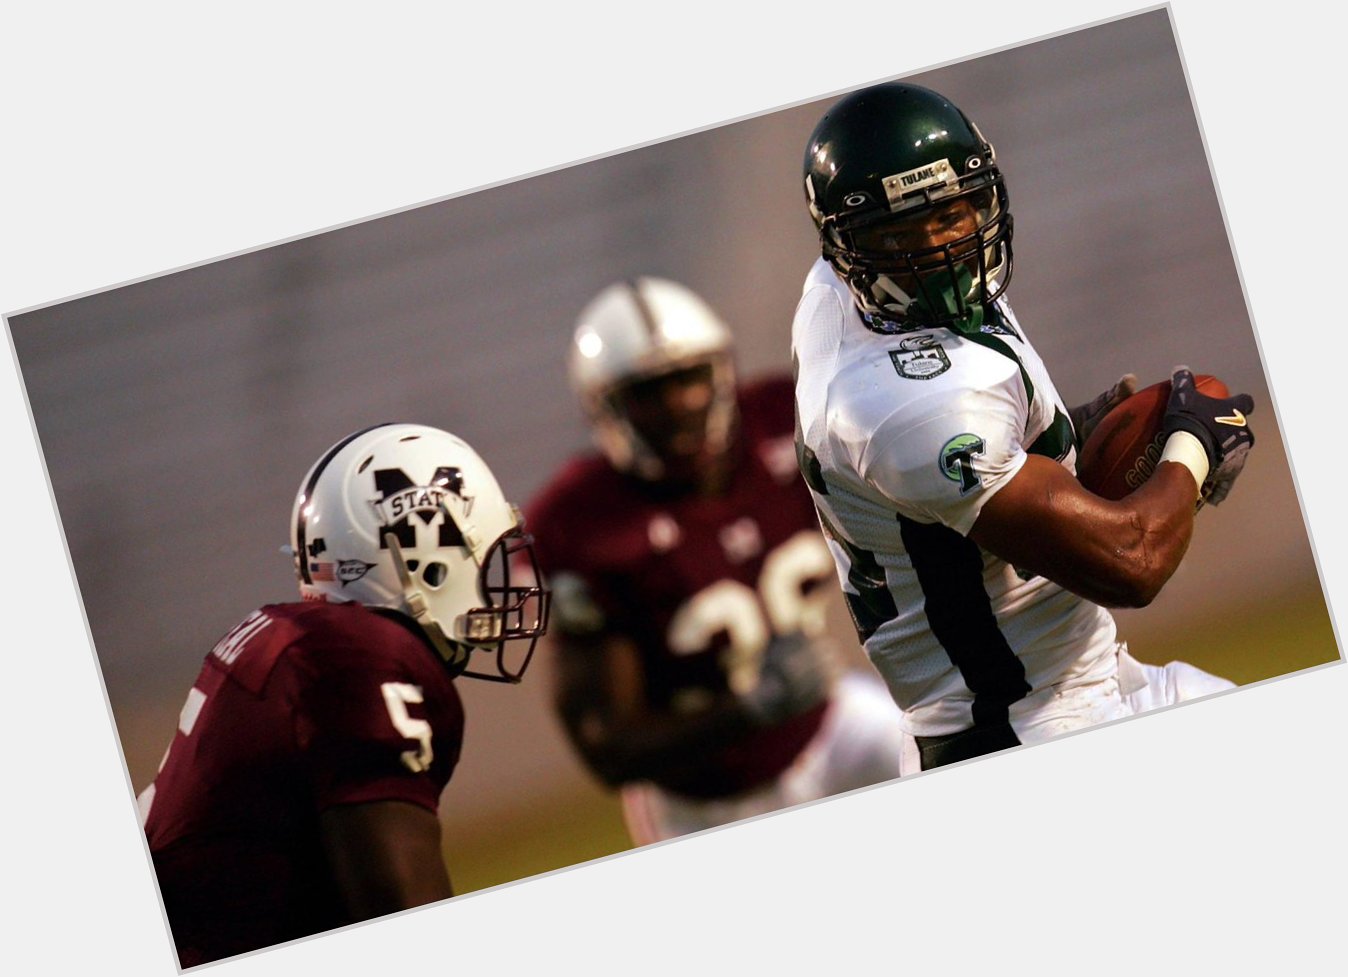 Before he was an NFL All-Pro, Matt Forte ran for 2,127 yards as SR at Tulane. Happy Birthday - 29 today. 